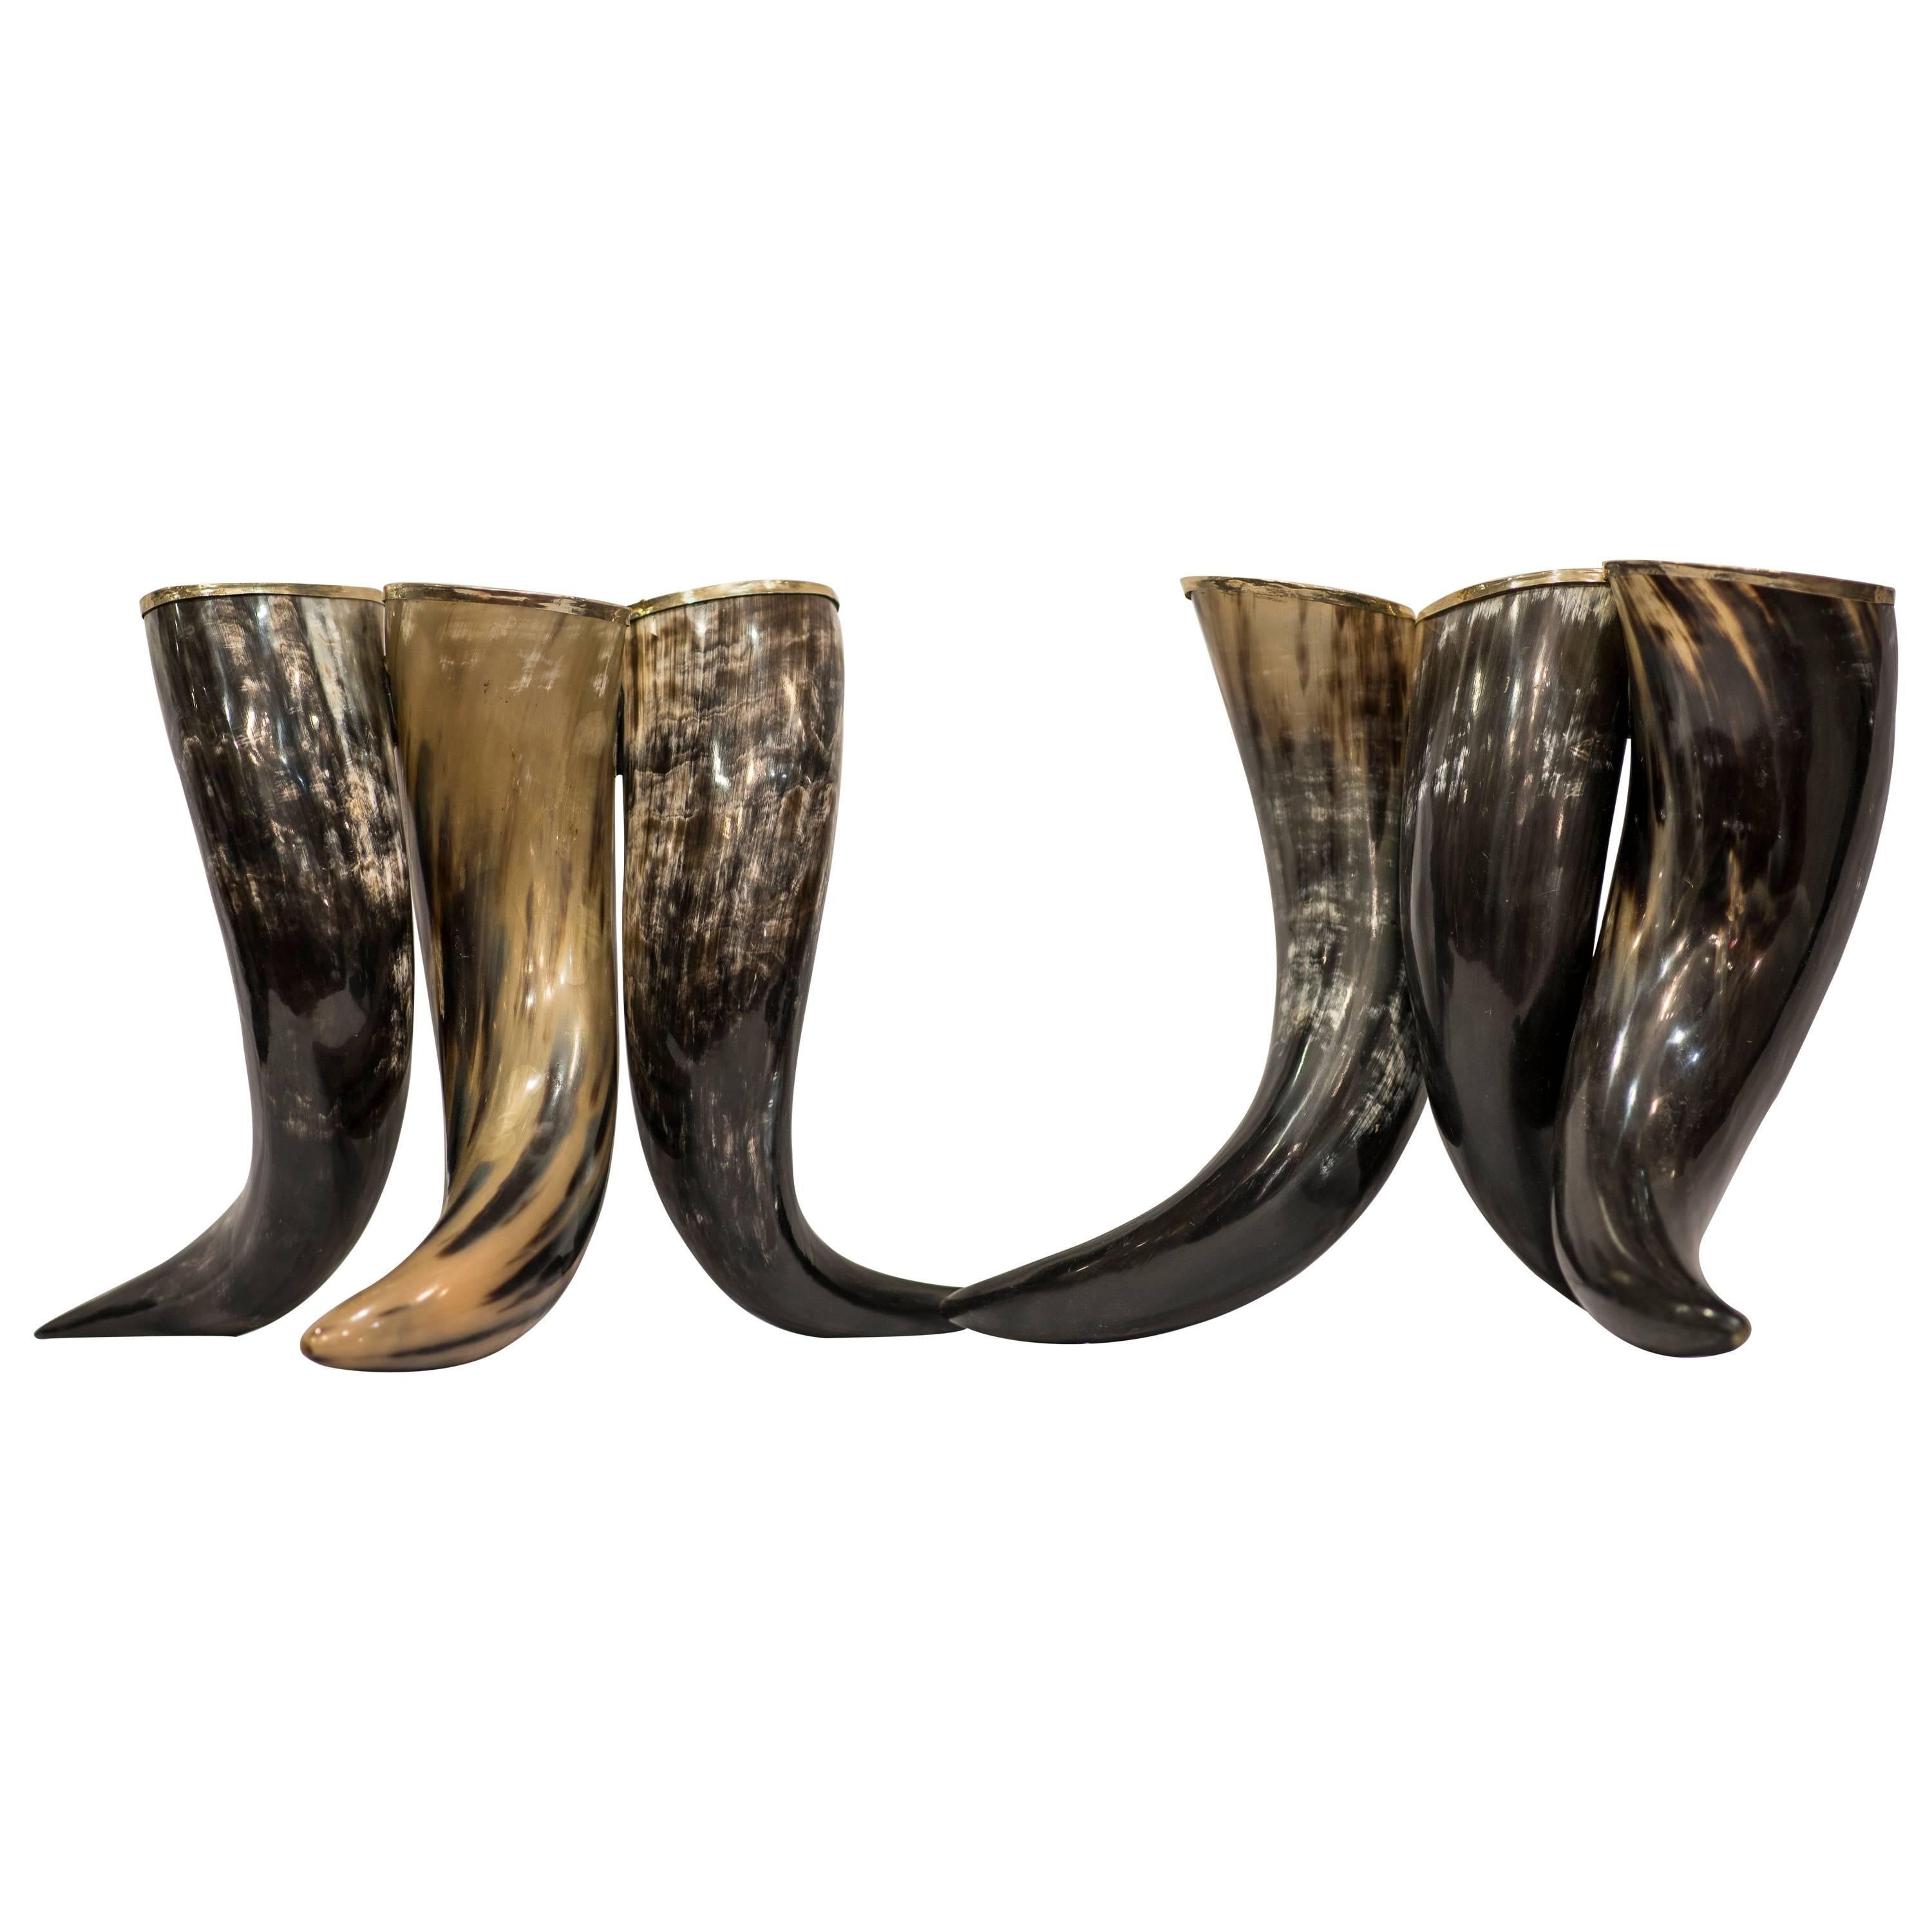 Midcentury Buffalo Horns with Silver Vases 